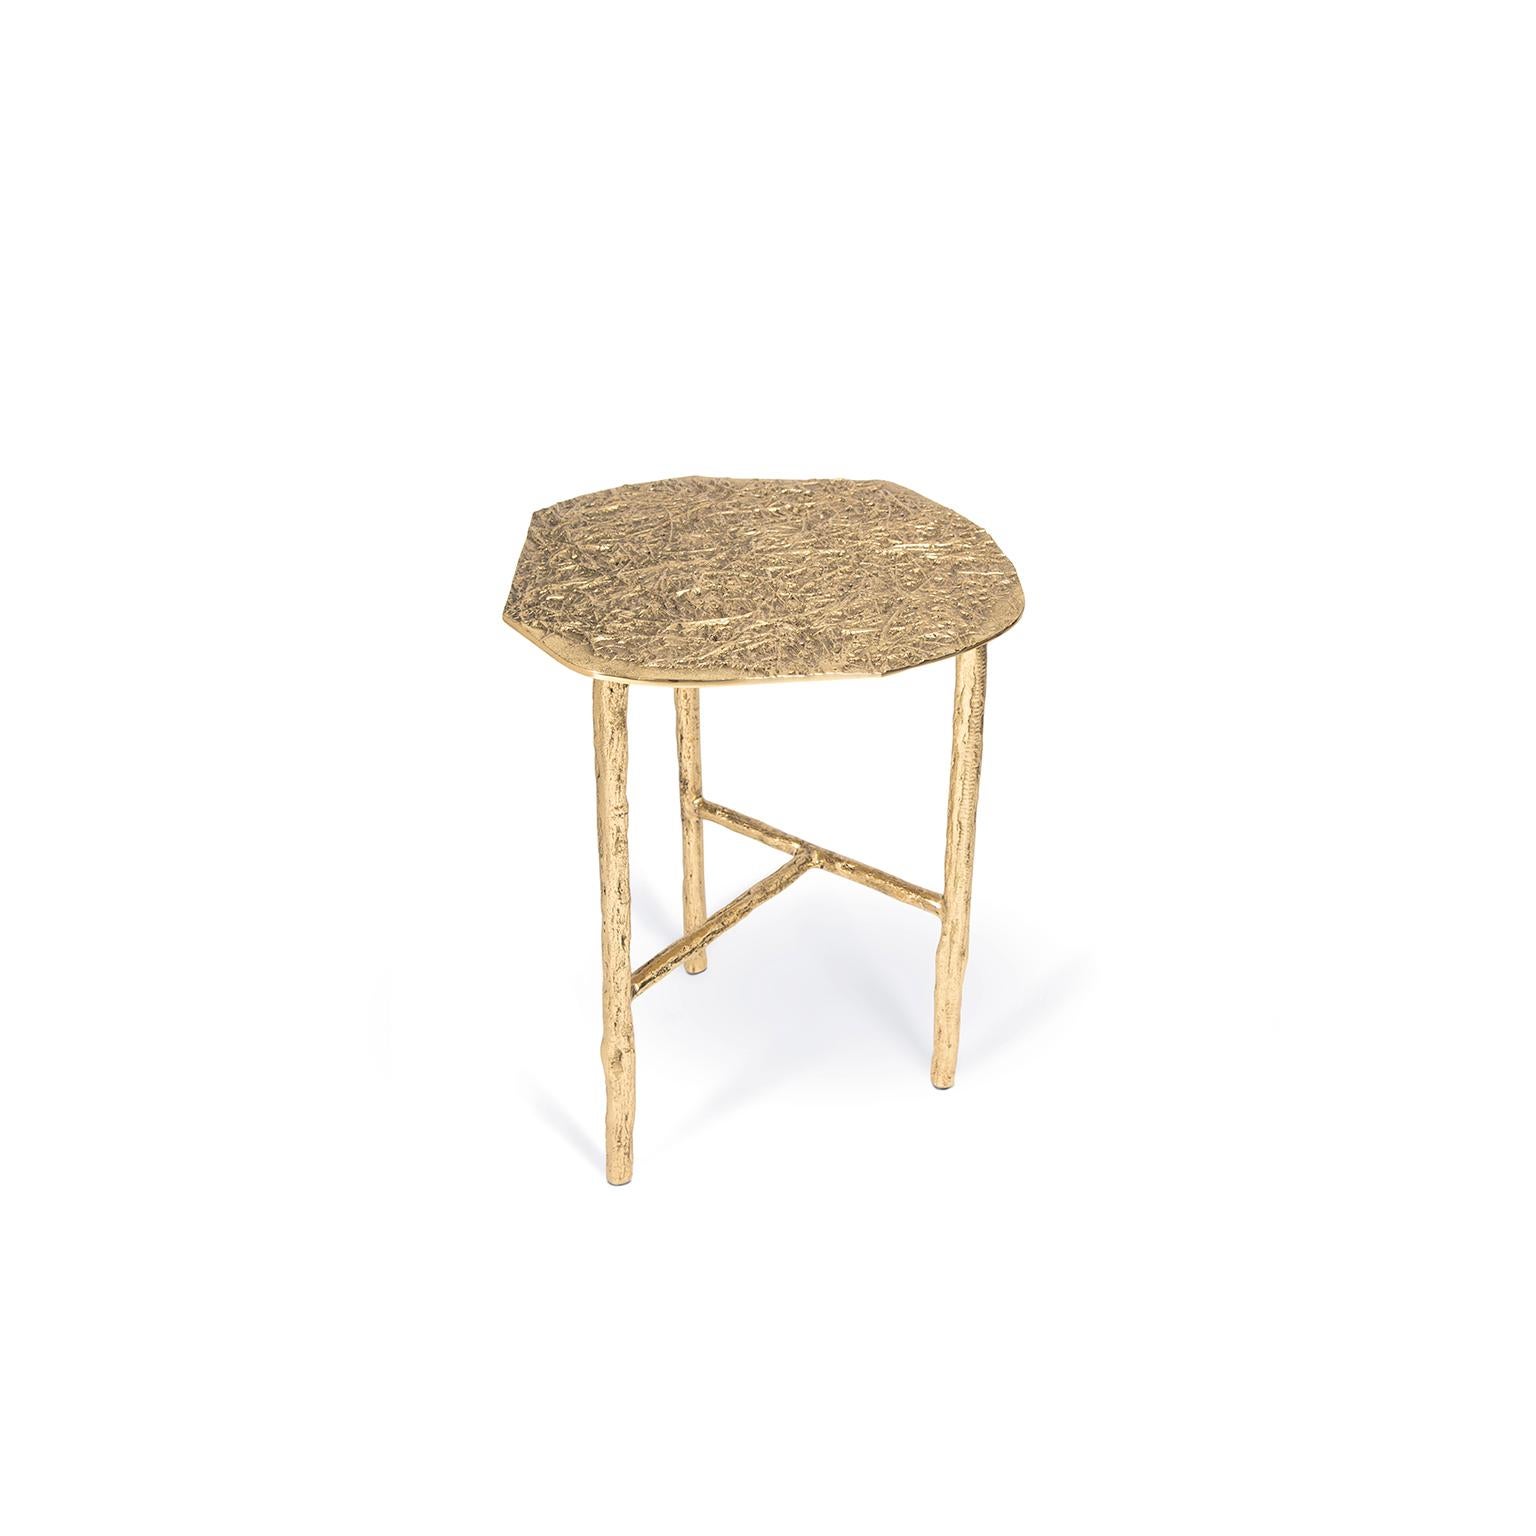 Portuguese Modern Art Gallery Country Side Table in Polished Brass Cast, Inspired by Nature For Sale